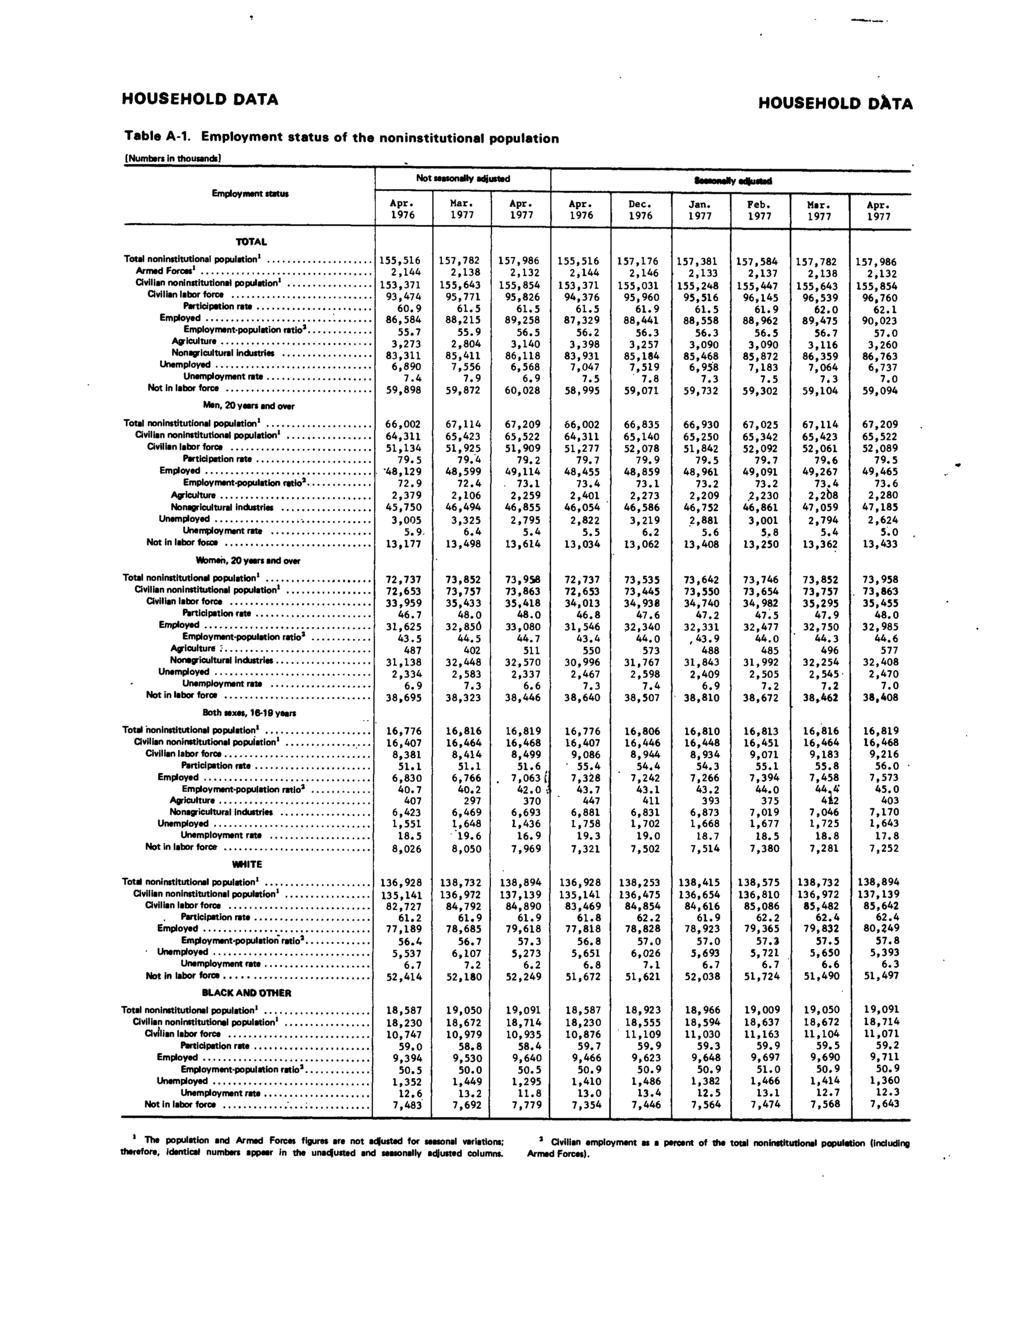 HOUSEHOLD DATA HOUSEHOLD DXTA Table A-. Employment status of the noninstitutional population [Numbers in thousands] Employment status Not seasonally adjusted SaaaonaNy adfuslad Mar. Dec. Jan. Feb.